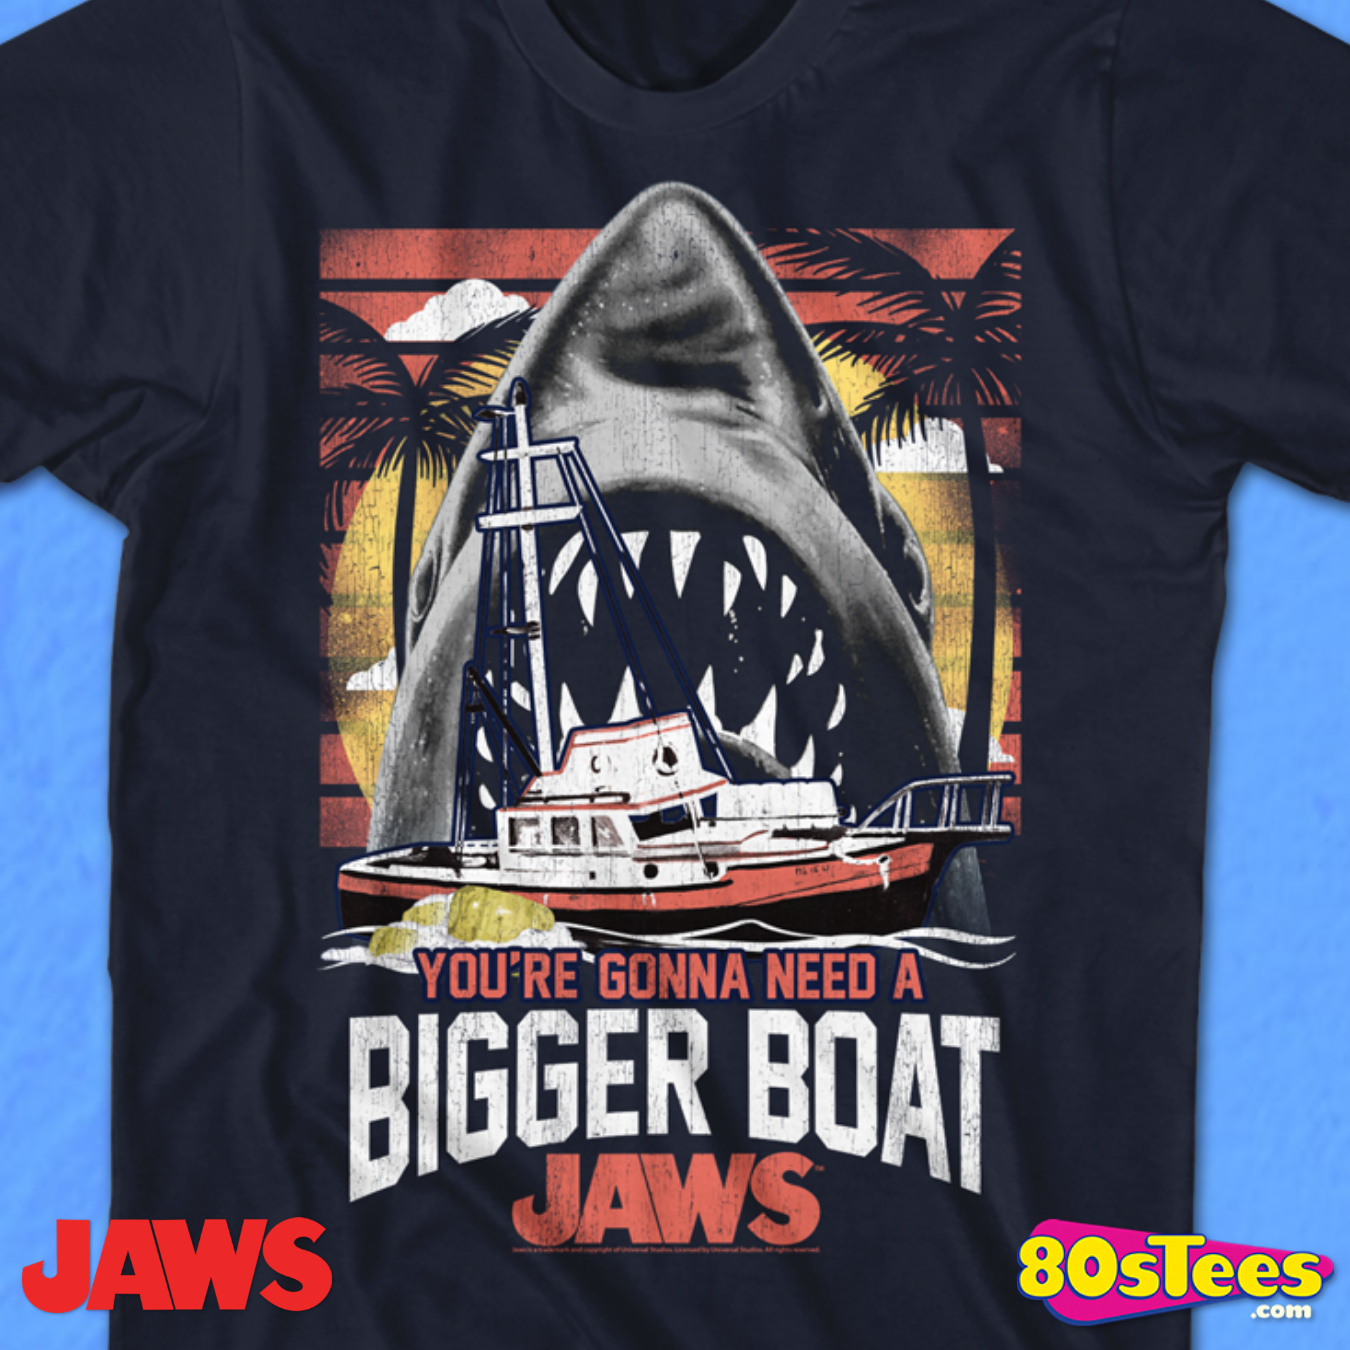 'Gonna Need a Bigger Boat' Movie T-Shirt Inspired by Jaws